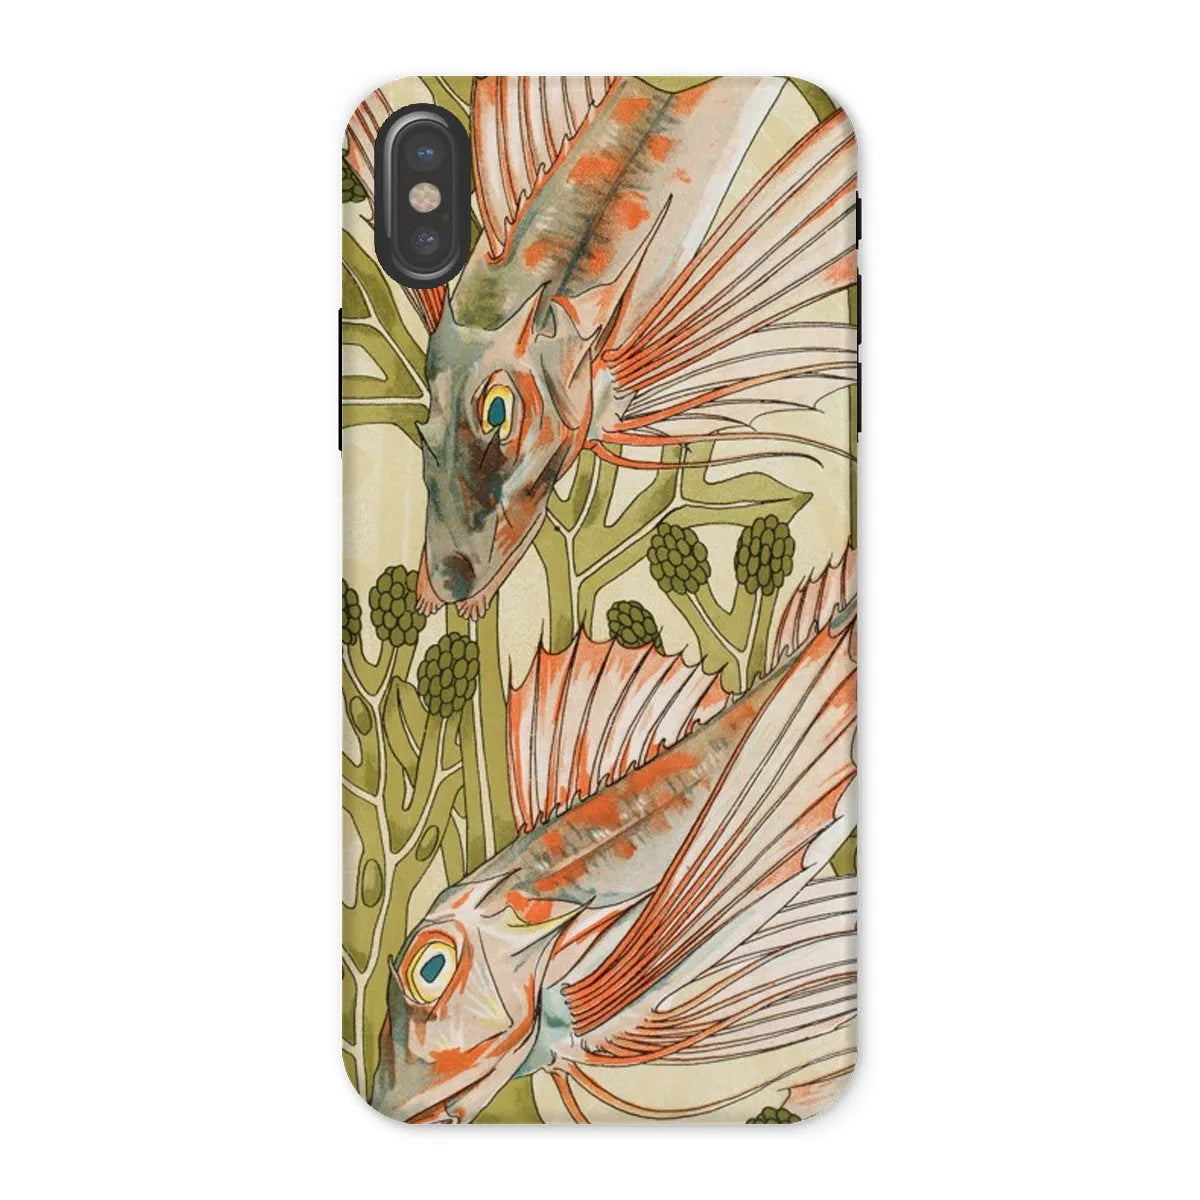 Red Fish - Animal Art Phone Case - Maurice Pillard Verneuil - Iphone x / Matte - Mobile Phone Cases - Aesthetic Art